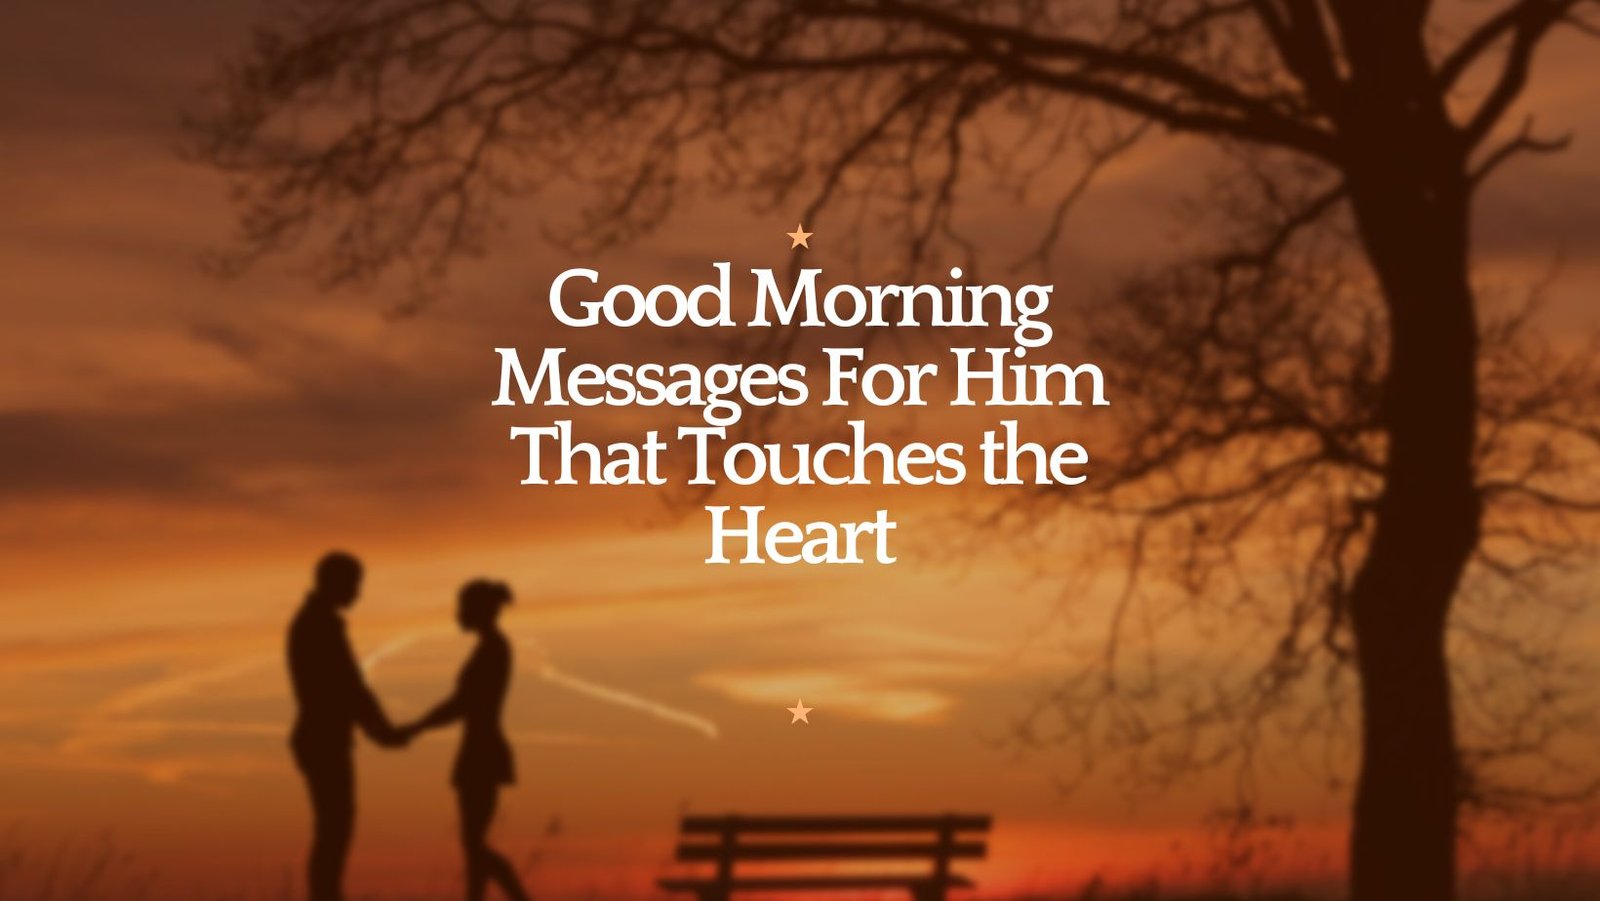 Good Morning Messages For Him That Touches the Heart